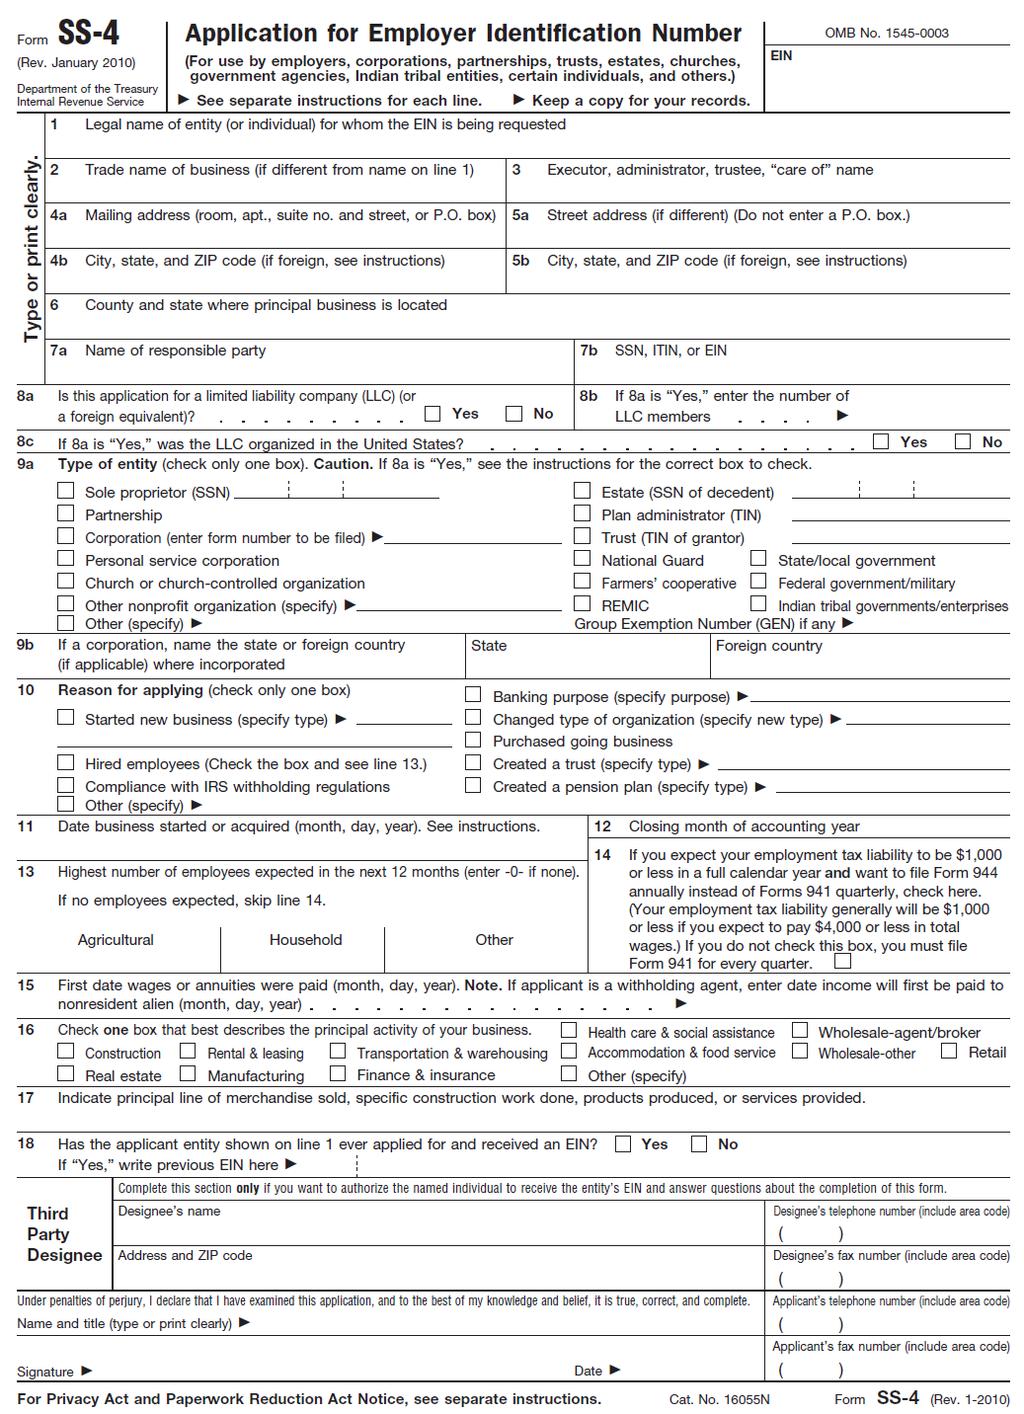 IRS FORM SS-4 As of